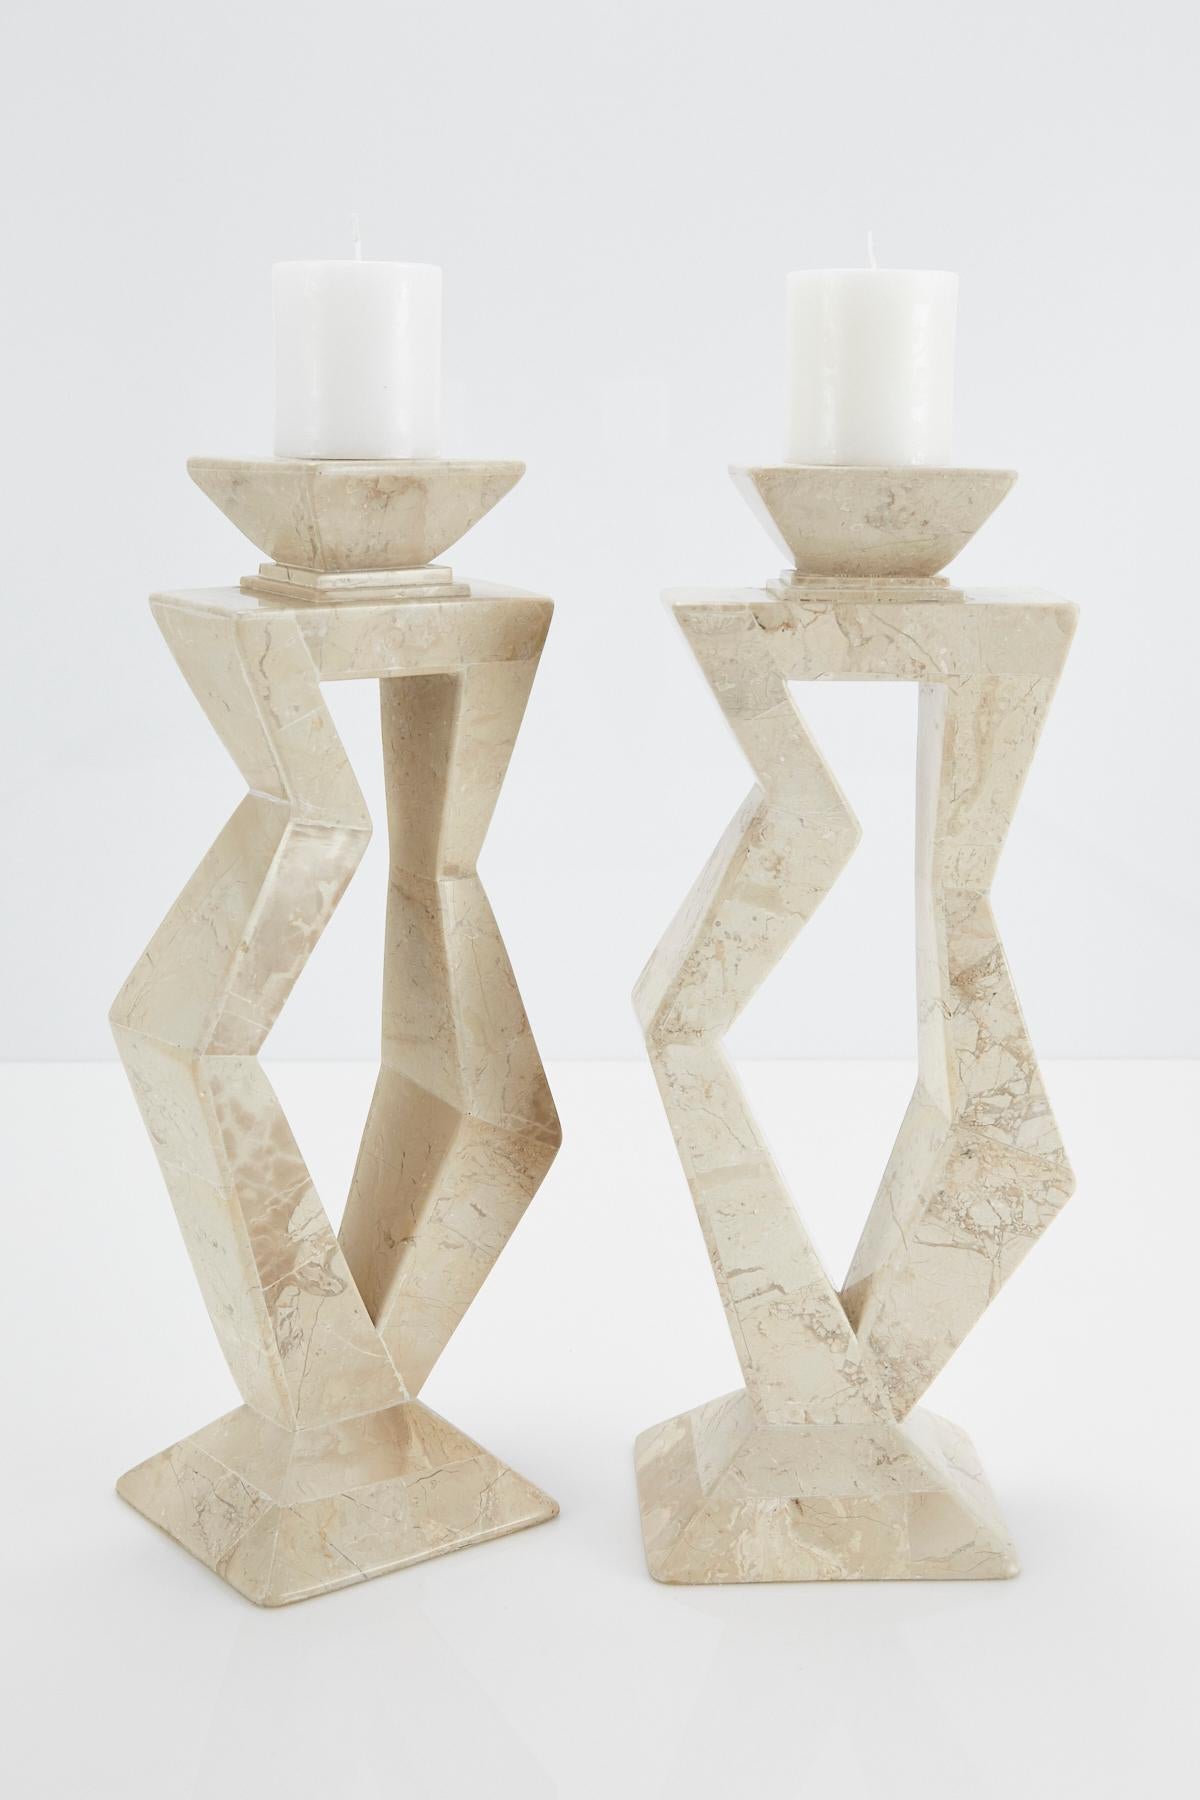 Painted Pair of Oversized Postmodern Tessellated Cantor Stone Candlesticks, 1990s